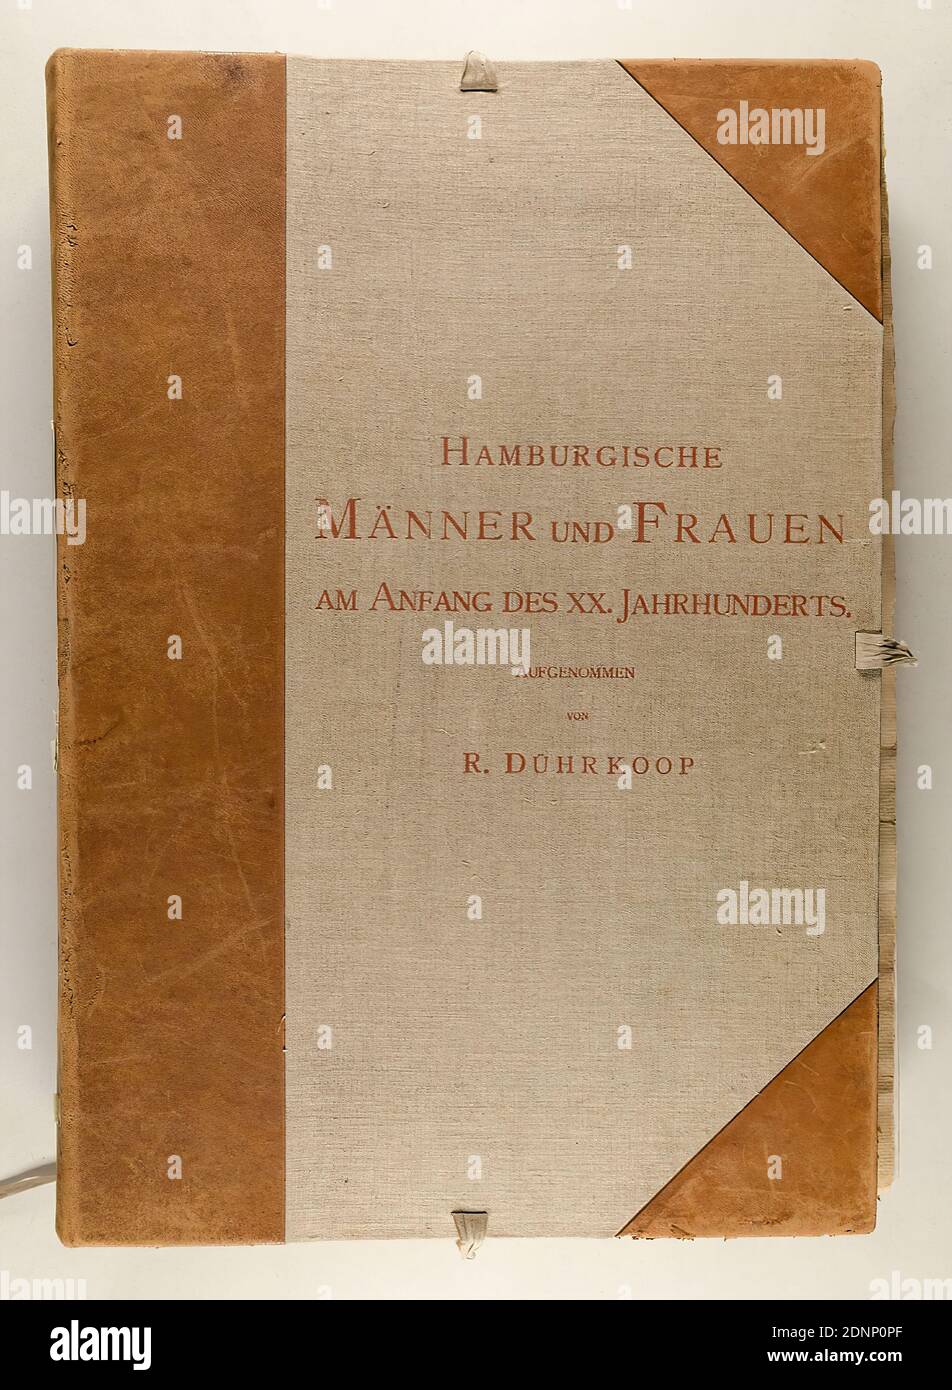 Rudolph Dührkoop, Hamburg Men and Women at the Beginning of the XXth Century. Camera portraits, Staatliche Landesbildstelle Hamburg, collection on the history of, paper, cardboard, linen fiber, leather, heliogravure, letterpress, Total (folder outside): Height: 48,50 cm; Width: 33,50 cm; Depth: 6,00 cm, portrait photography, portrait, historical person, folder Hamburgische Männer und Frauen am Anfang des XX. Camera Portraits - Photographed, etched in copper and printed by Rudolph Dührkoop Hamburg 1905 with 130 heliogravures with portraits of Hamburg personalities Stock Photo